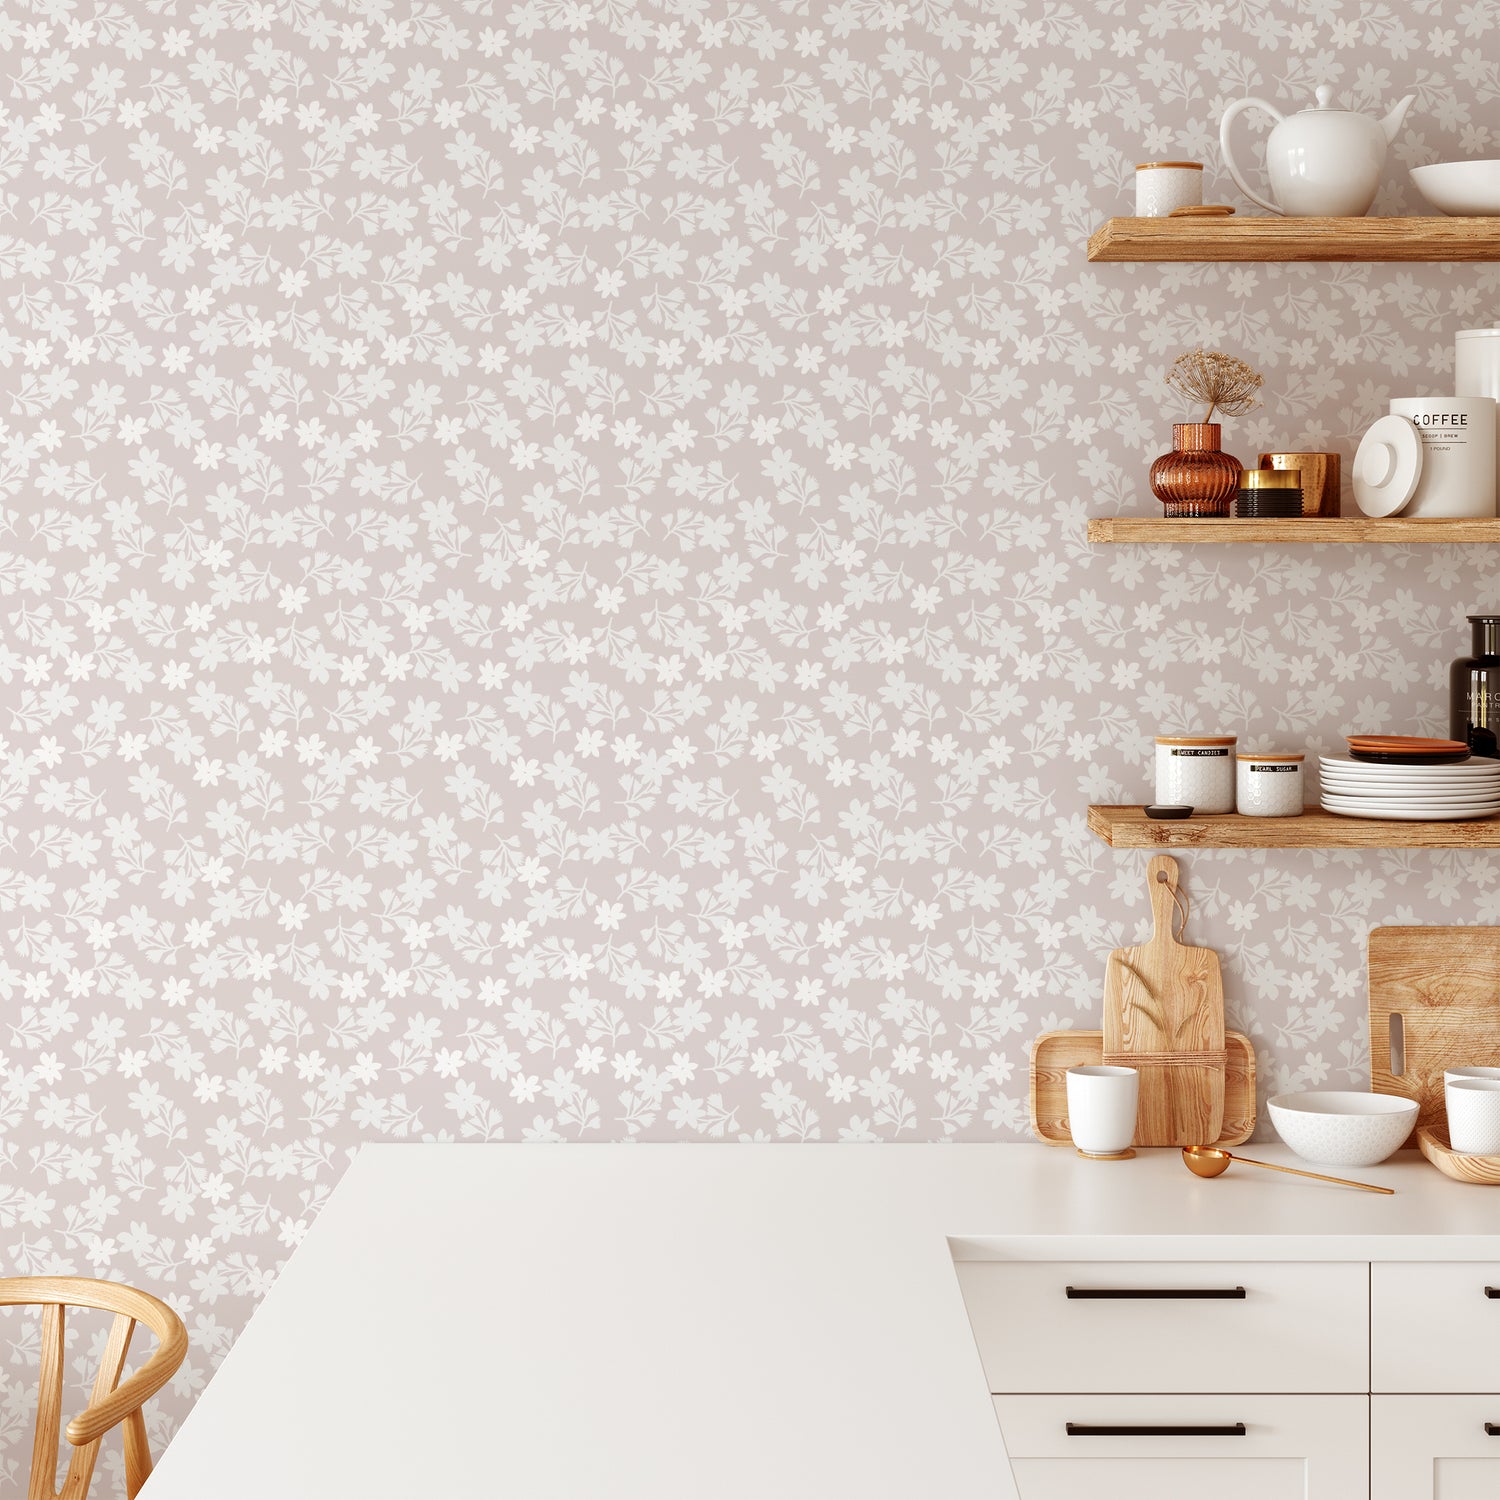 Introducing Liv Wallpaper, the perfect addition to any space. This pretty in pink floral wallpaper brings a touch of elegance and sophistication to your walls. 